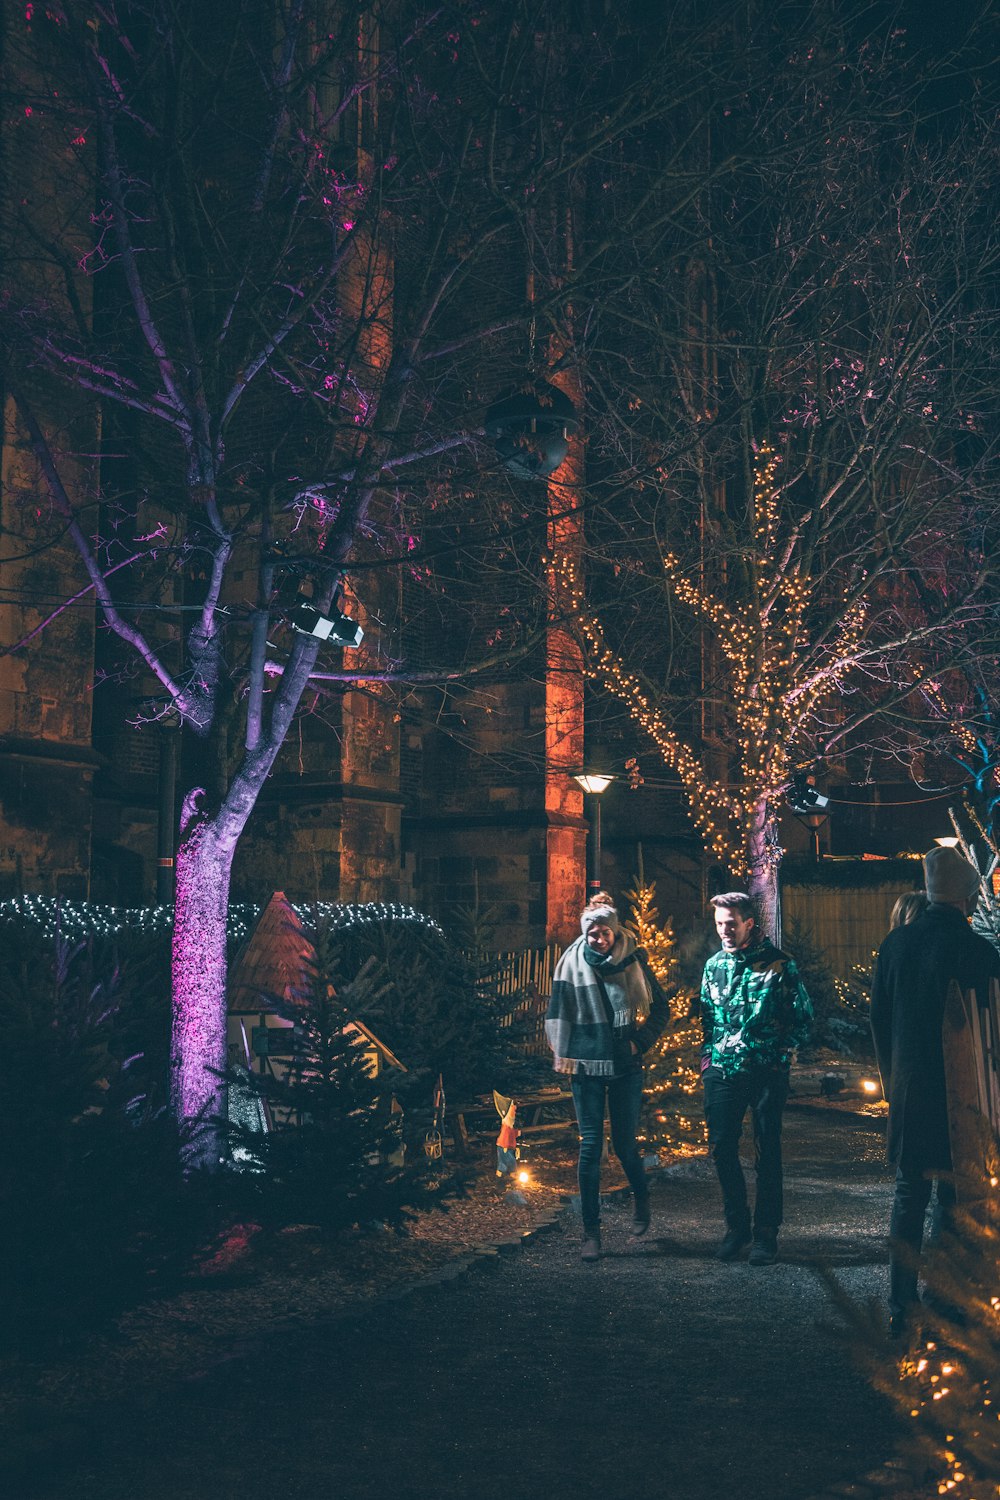 man and woman waking by trees with string lights at nighttime